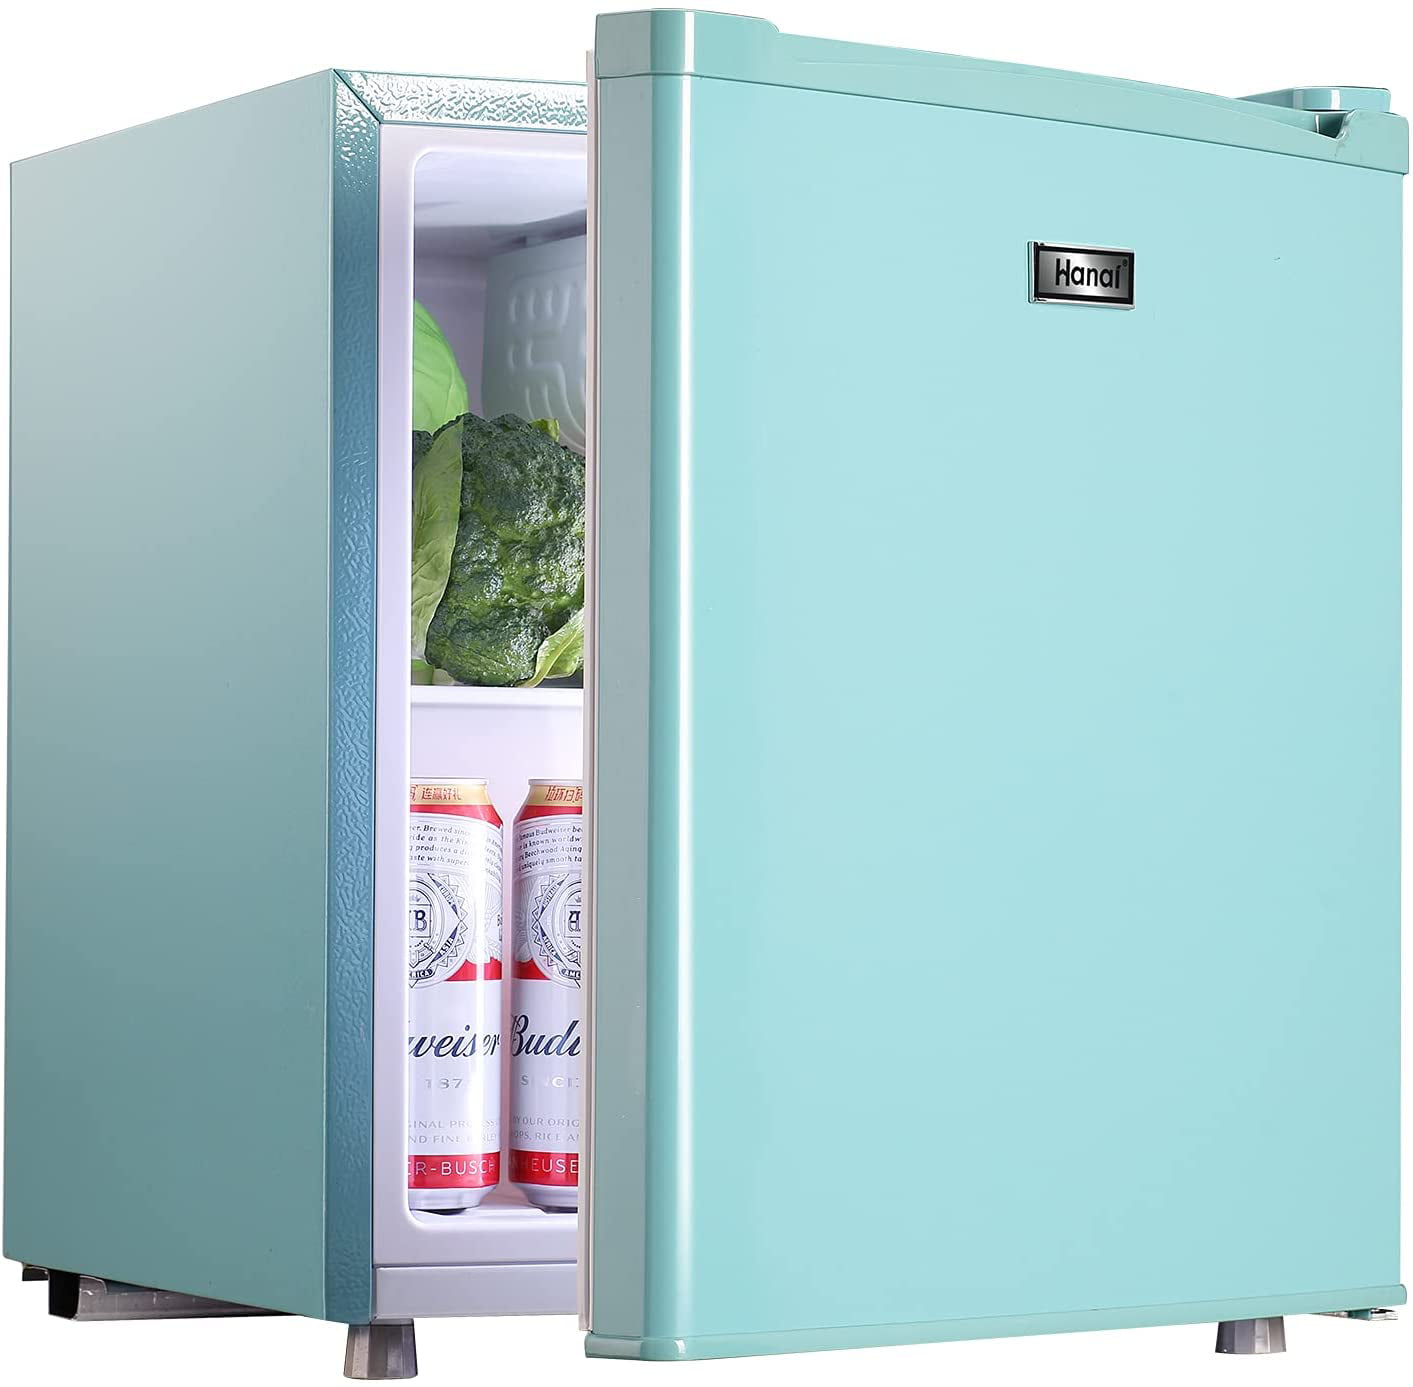 Compact Mini Dorm Small Fridge Refrigerator 1.7 Cu Ft Cooler Office Party Beer 